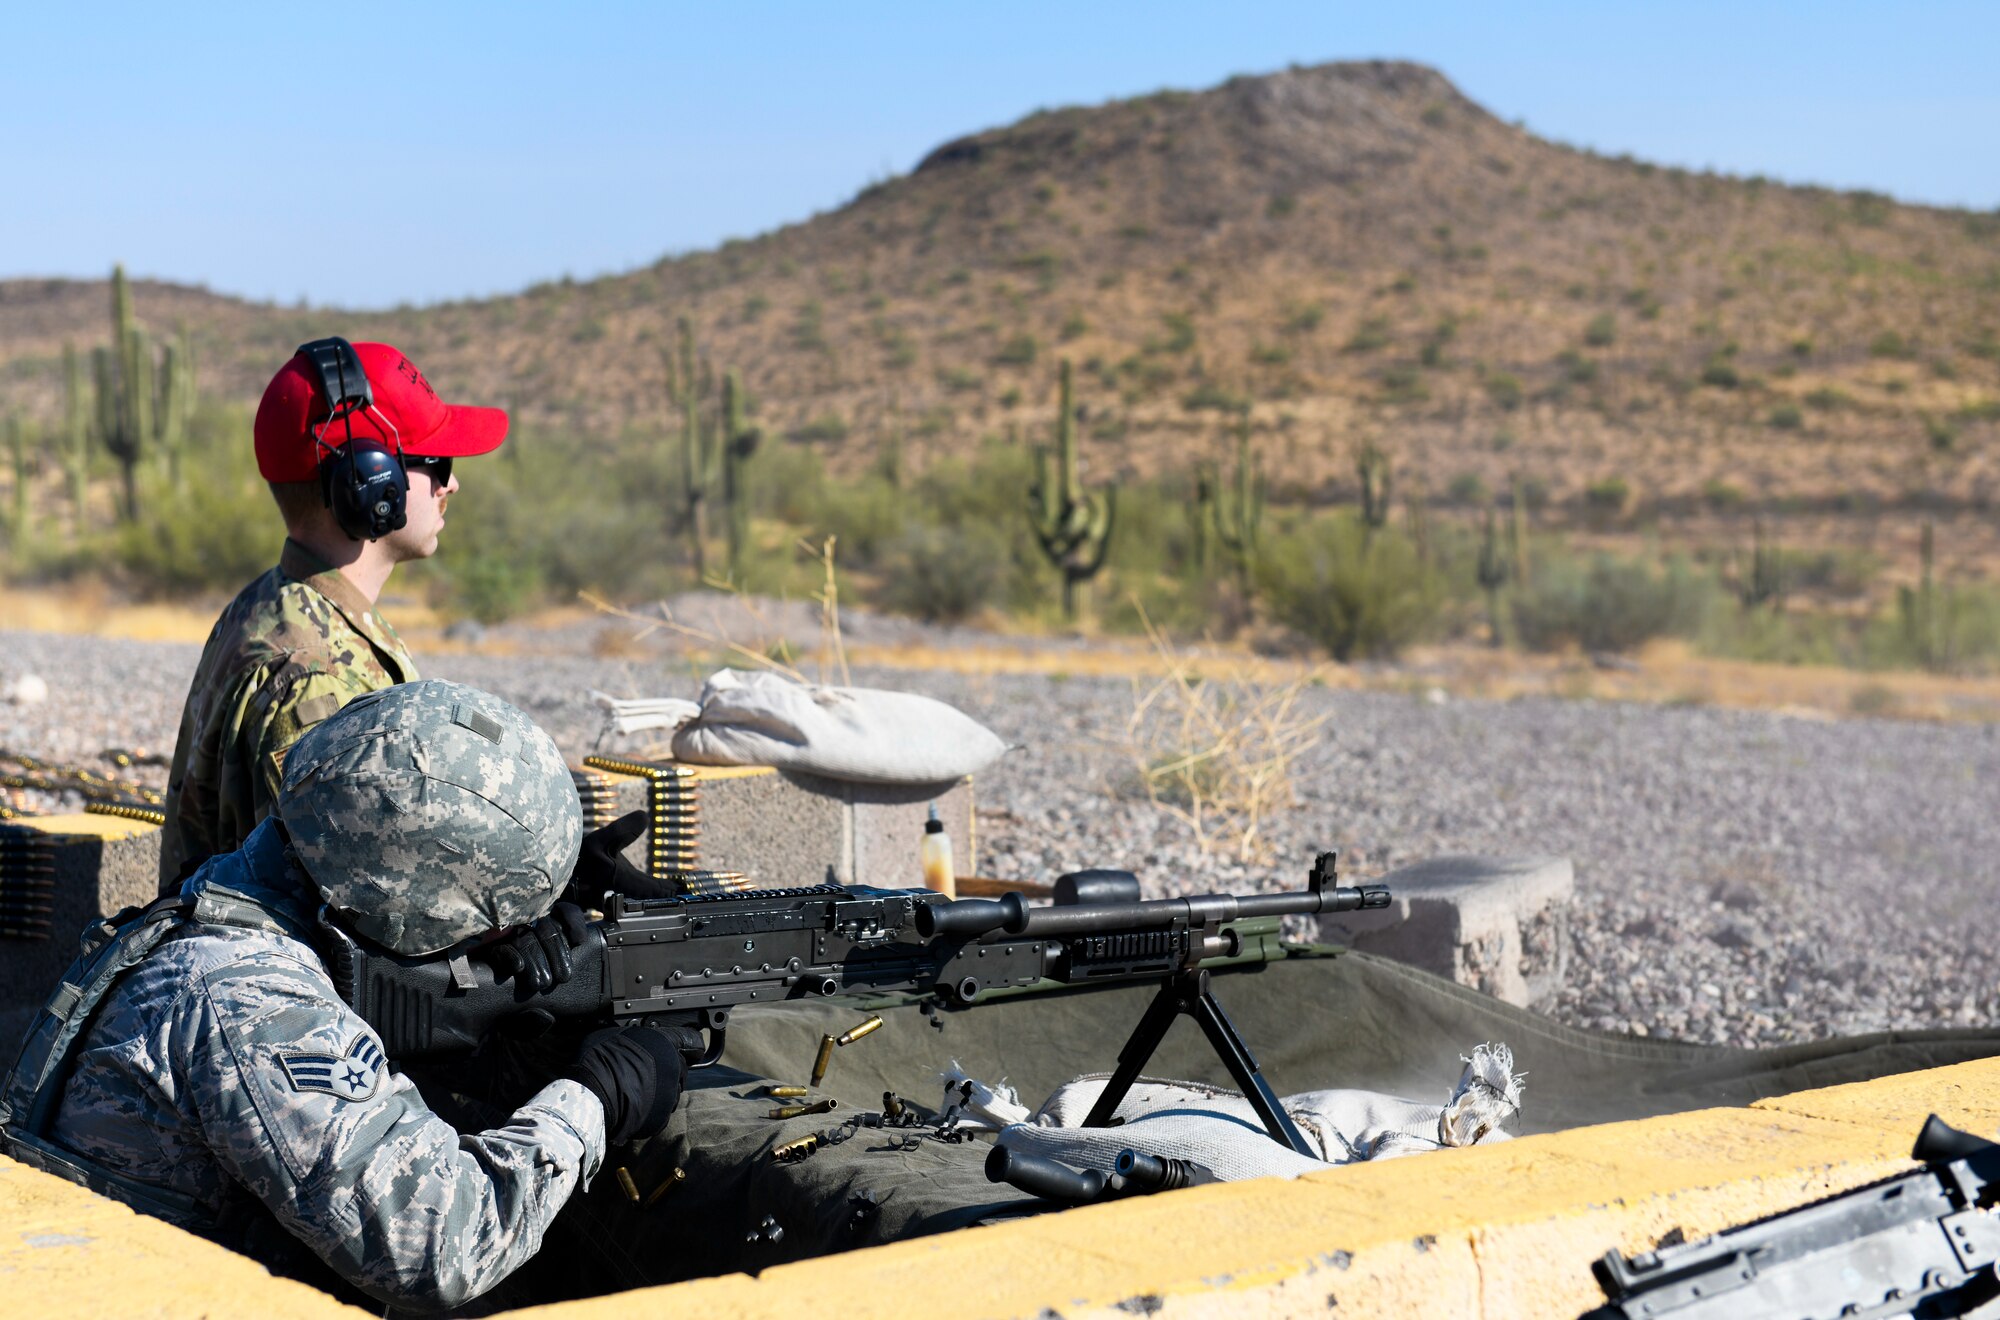 Staff Sgt. Casey Church, 56th Security Forces Squadron combat arms training and maintenance instructor, monitors Senior Airman Alexander Friend, 56th SFS law enforcement patrolman, while he fires a M240B machine gun Sept. 4, 2019, at the Arizona National Guard range in Florence, Ariz.